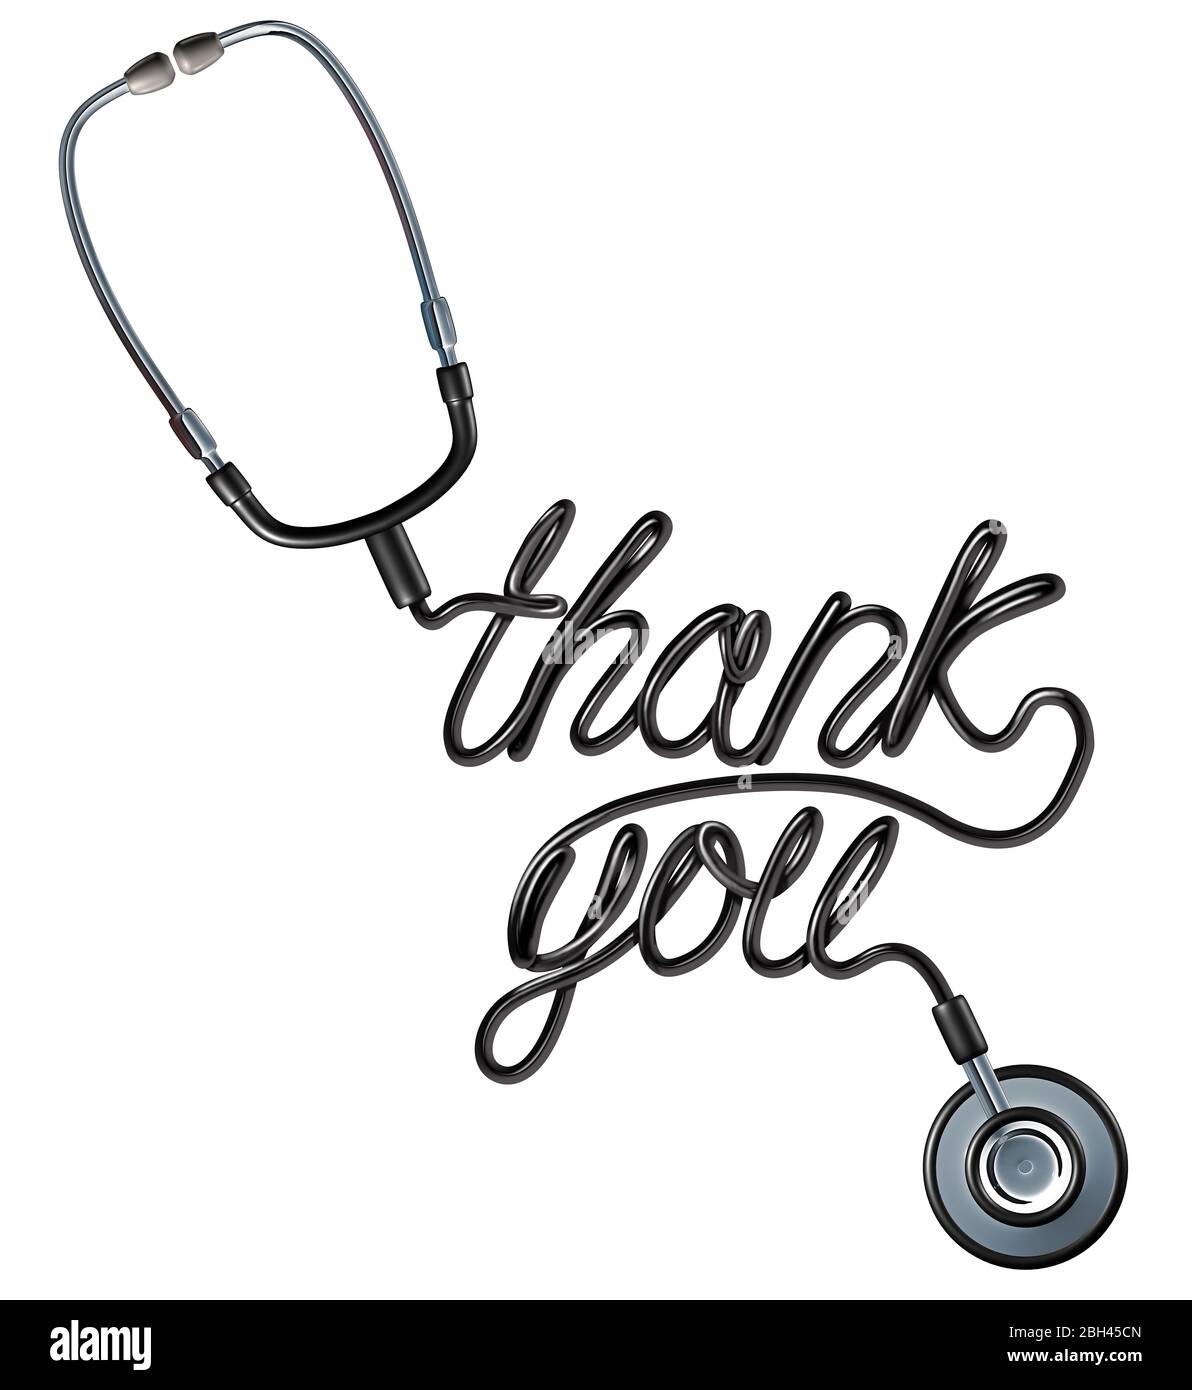 Healthcare Thank you as a doctor stethoscope shaped as a thankyou text as a symbol for health care workers appreciation. Stock Photo